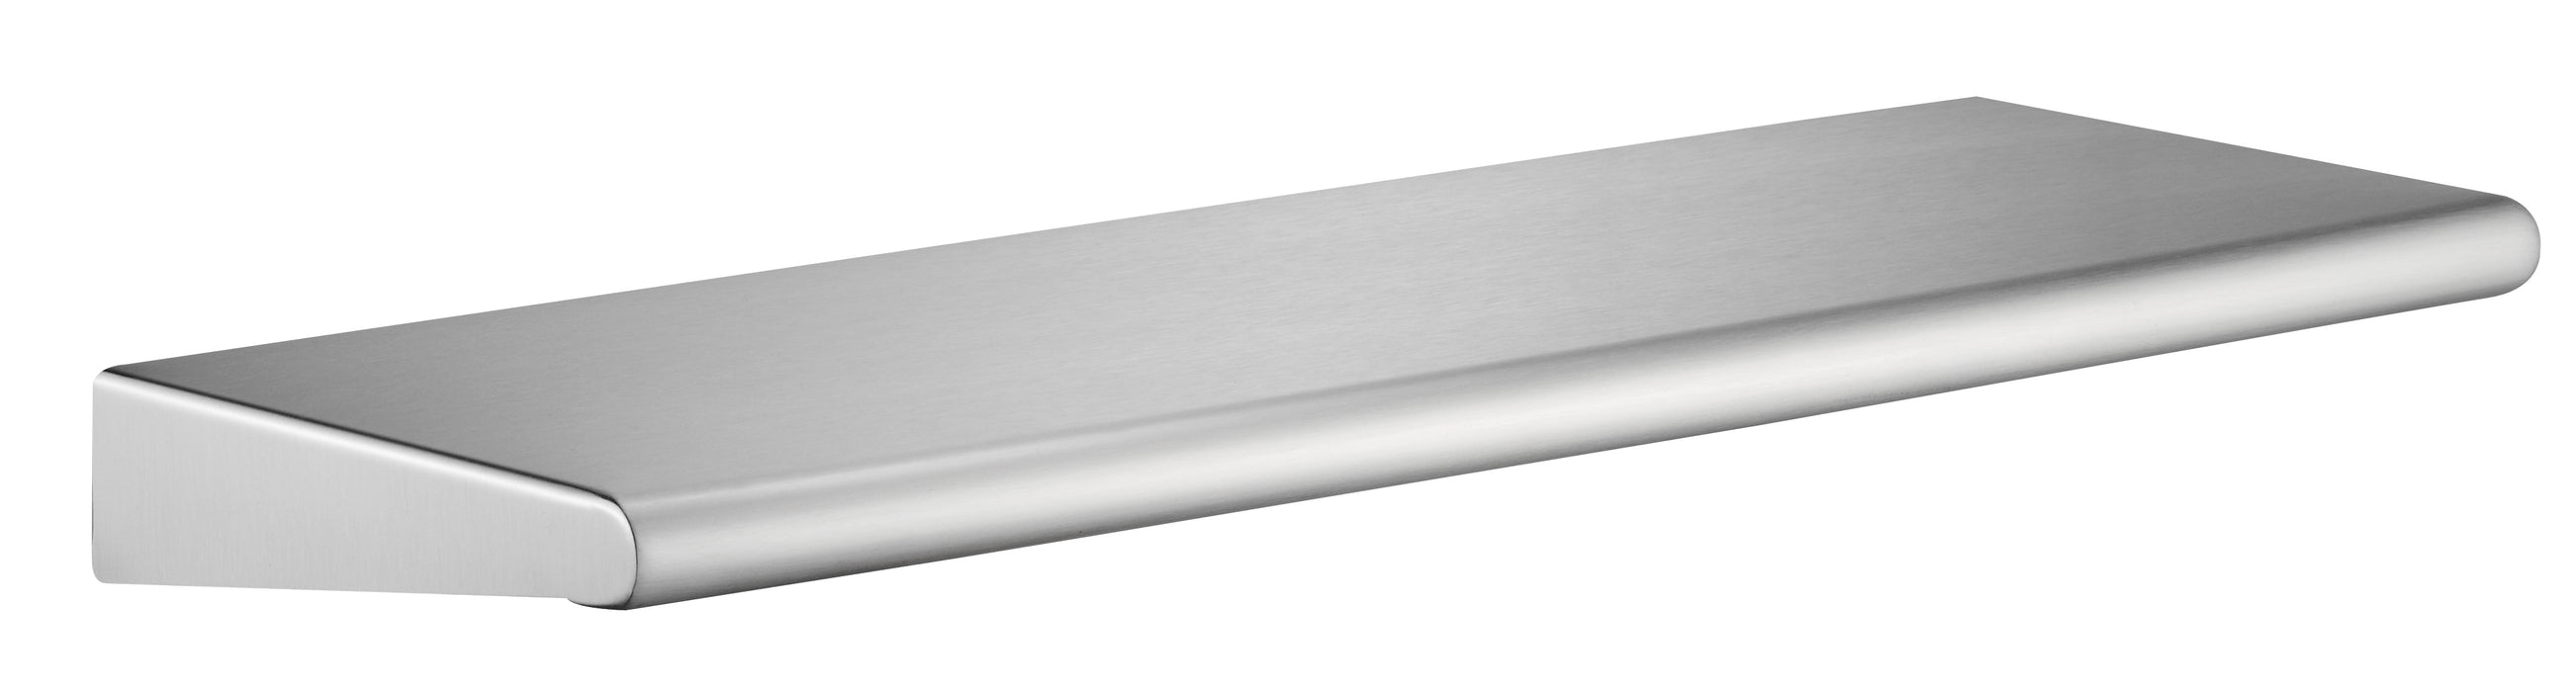 ASI 20692-672 Surface Mounted Shelf, Stainless Steel, 6 X 72 Inch